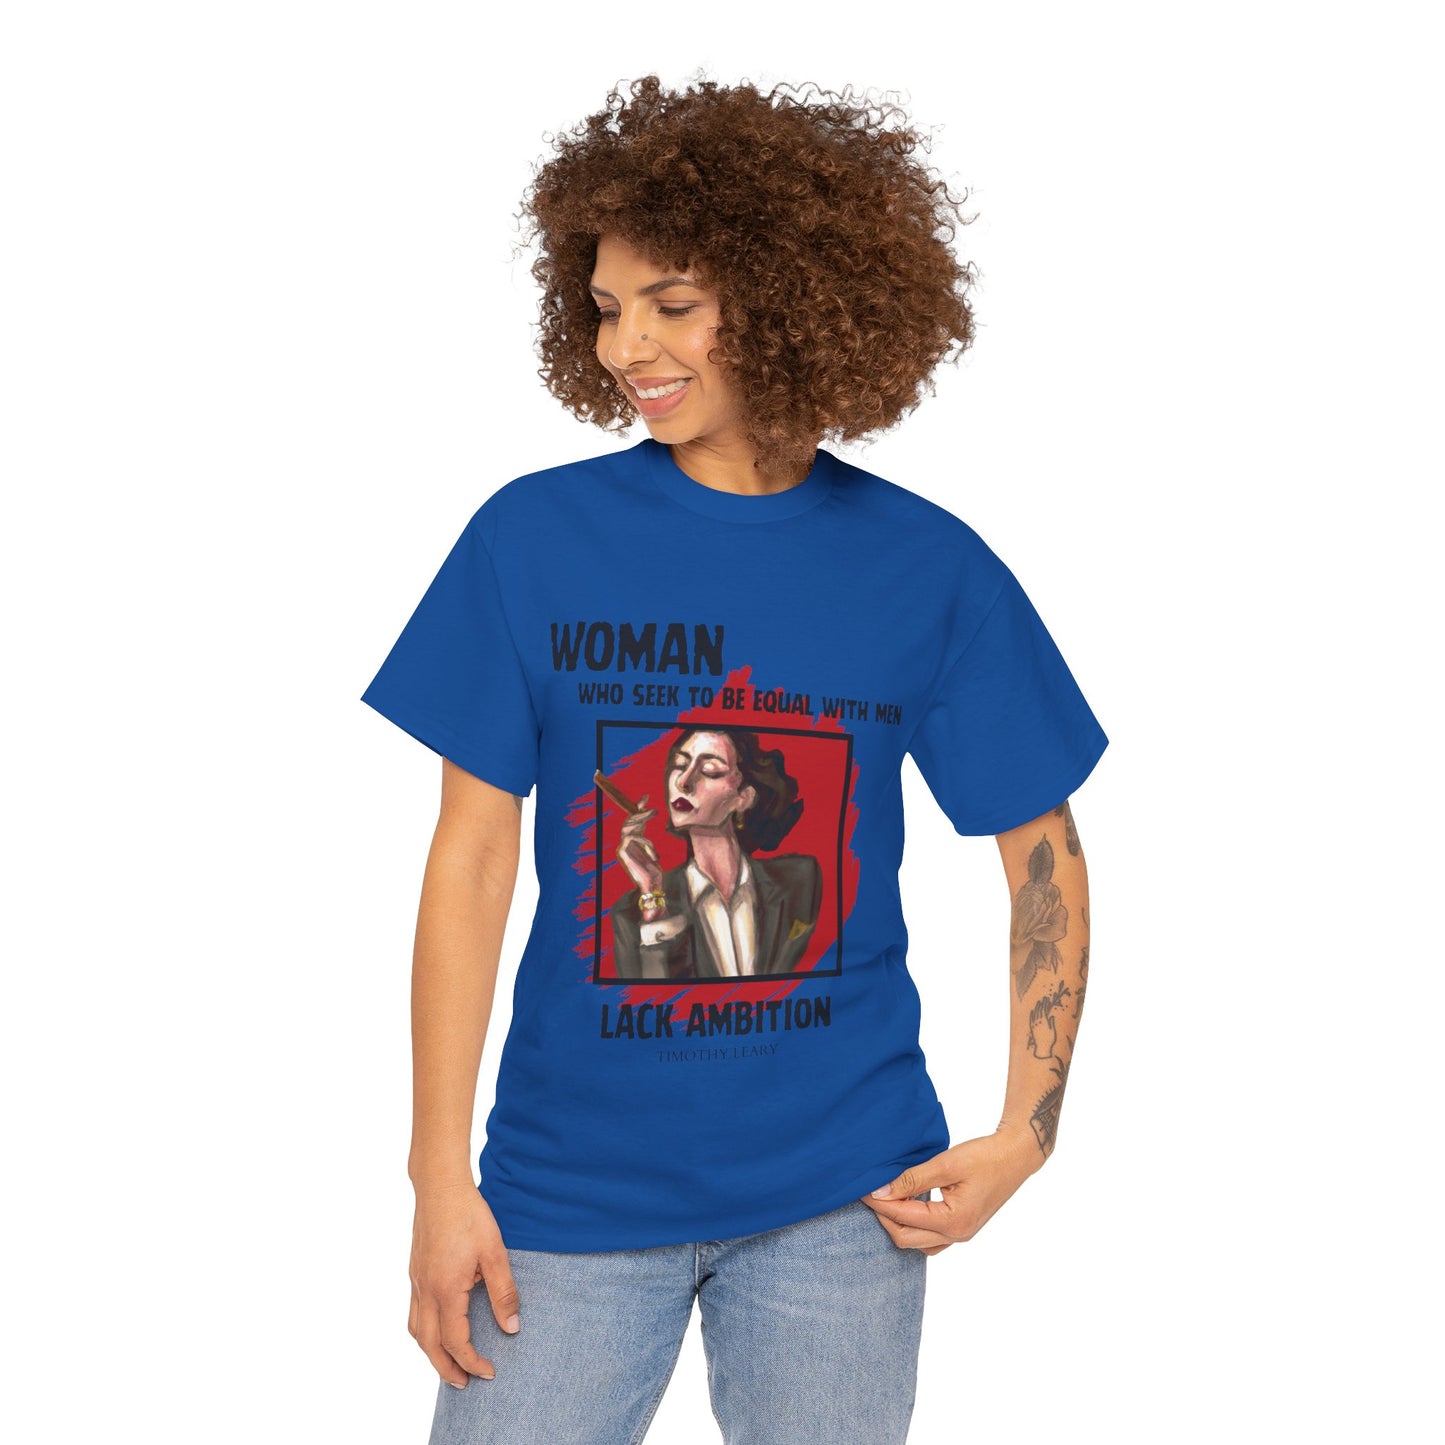 Equality is Not Lacking Ambition: Women's Empowerment Tee Timothy Leary